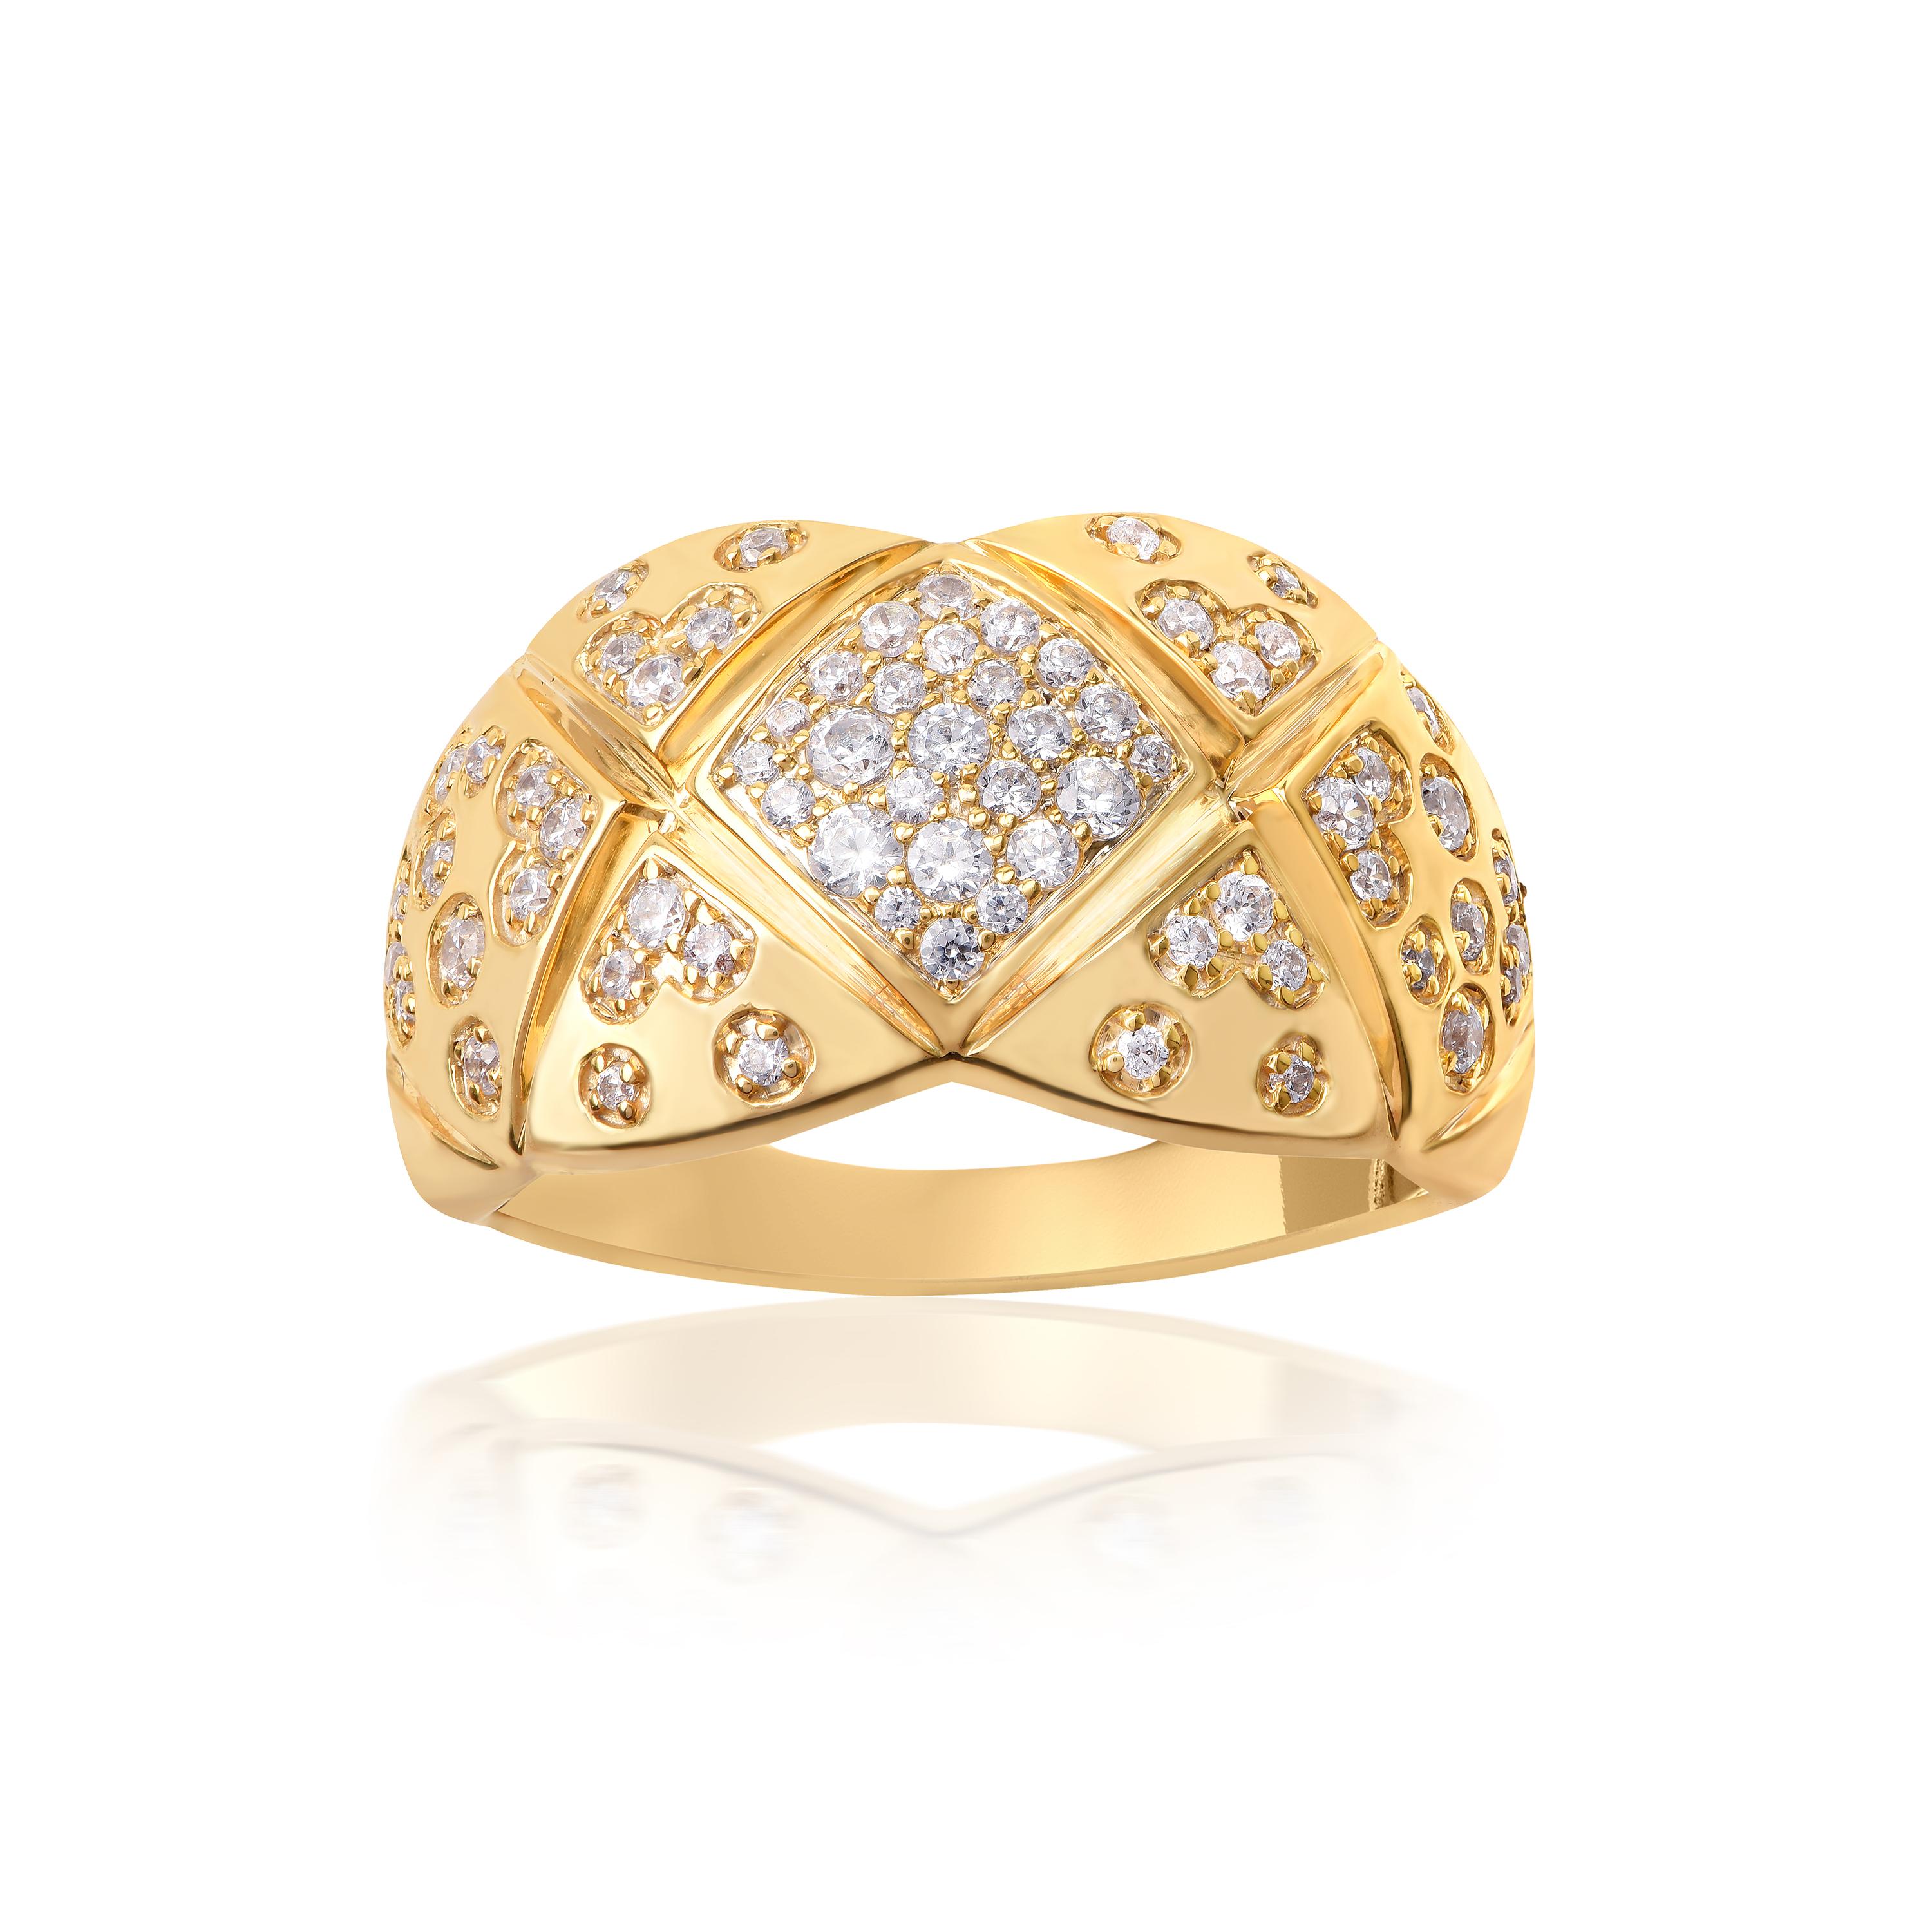 The beautiful diamond band dazzles with 67 brilliant cut diamonds elegantly set in micro-prong setting and crafted beautifully in 18 yellow gold. The diamonds are graded H-I Color, I2 Clarity.